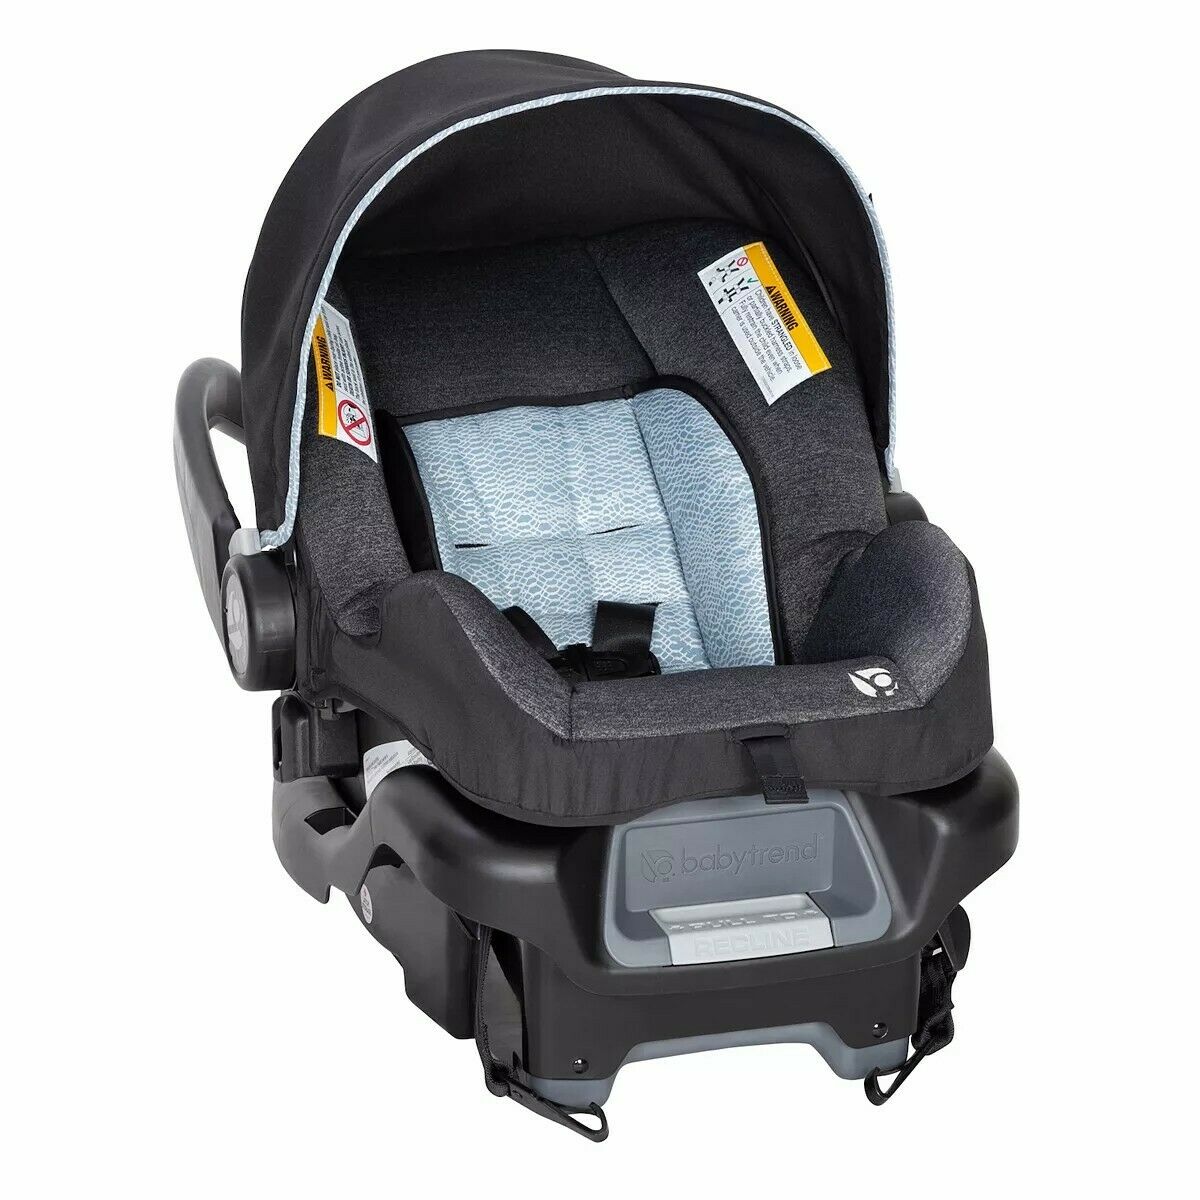 Baby Trend Stroller with Car Seat Travel System Infant Carriage Pram Boy's Combo